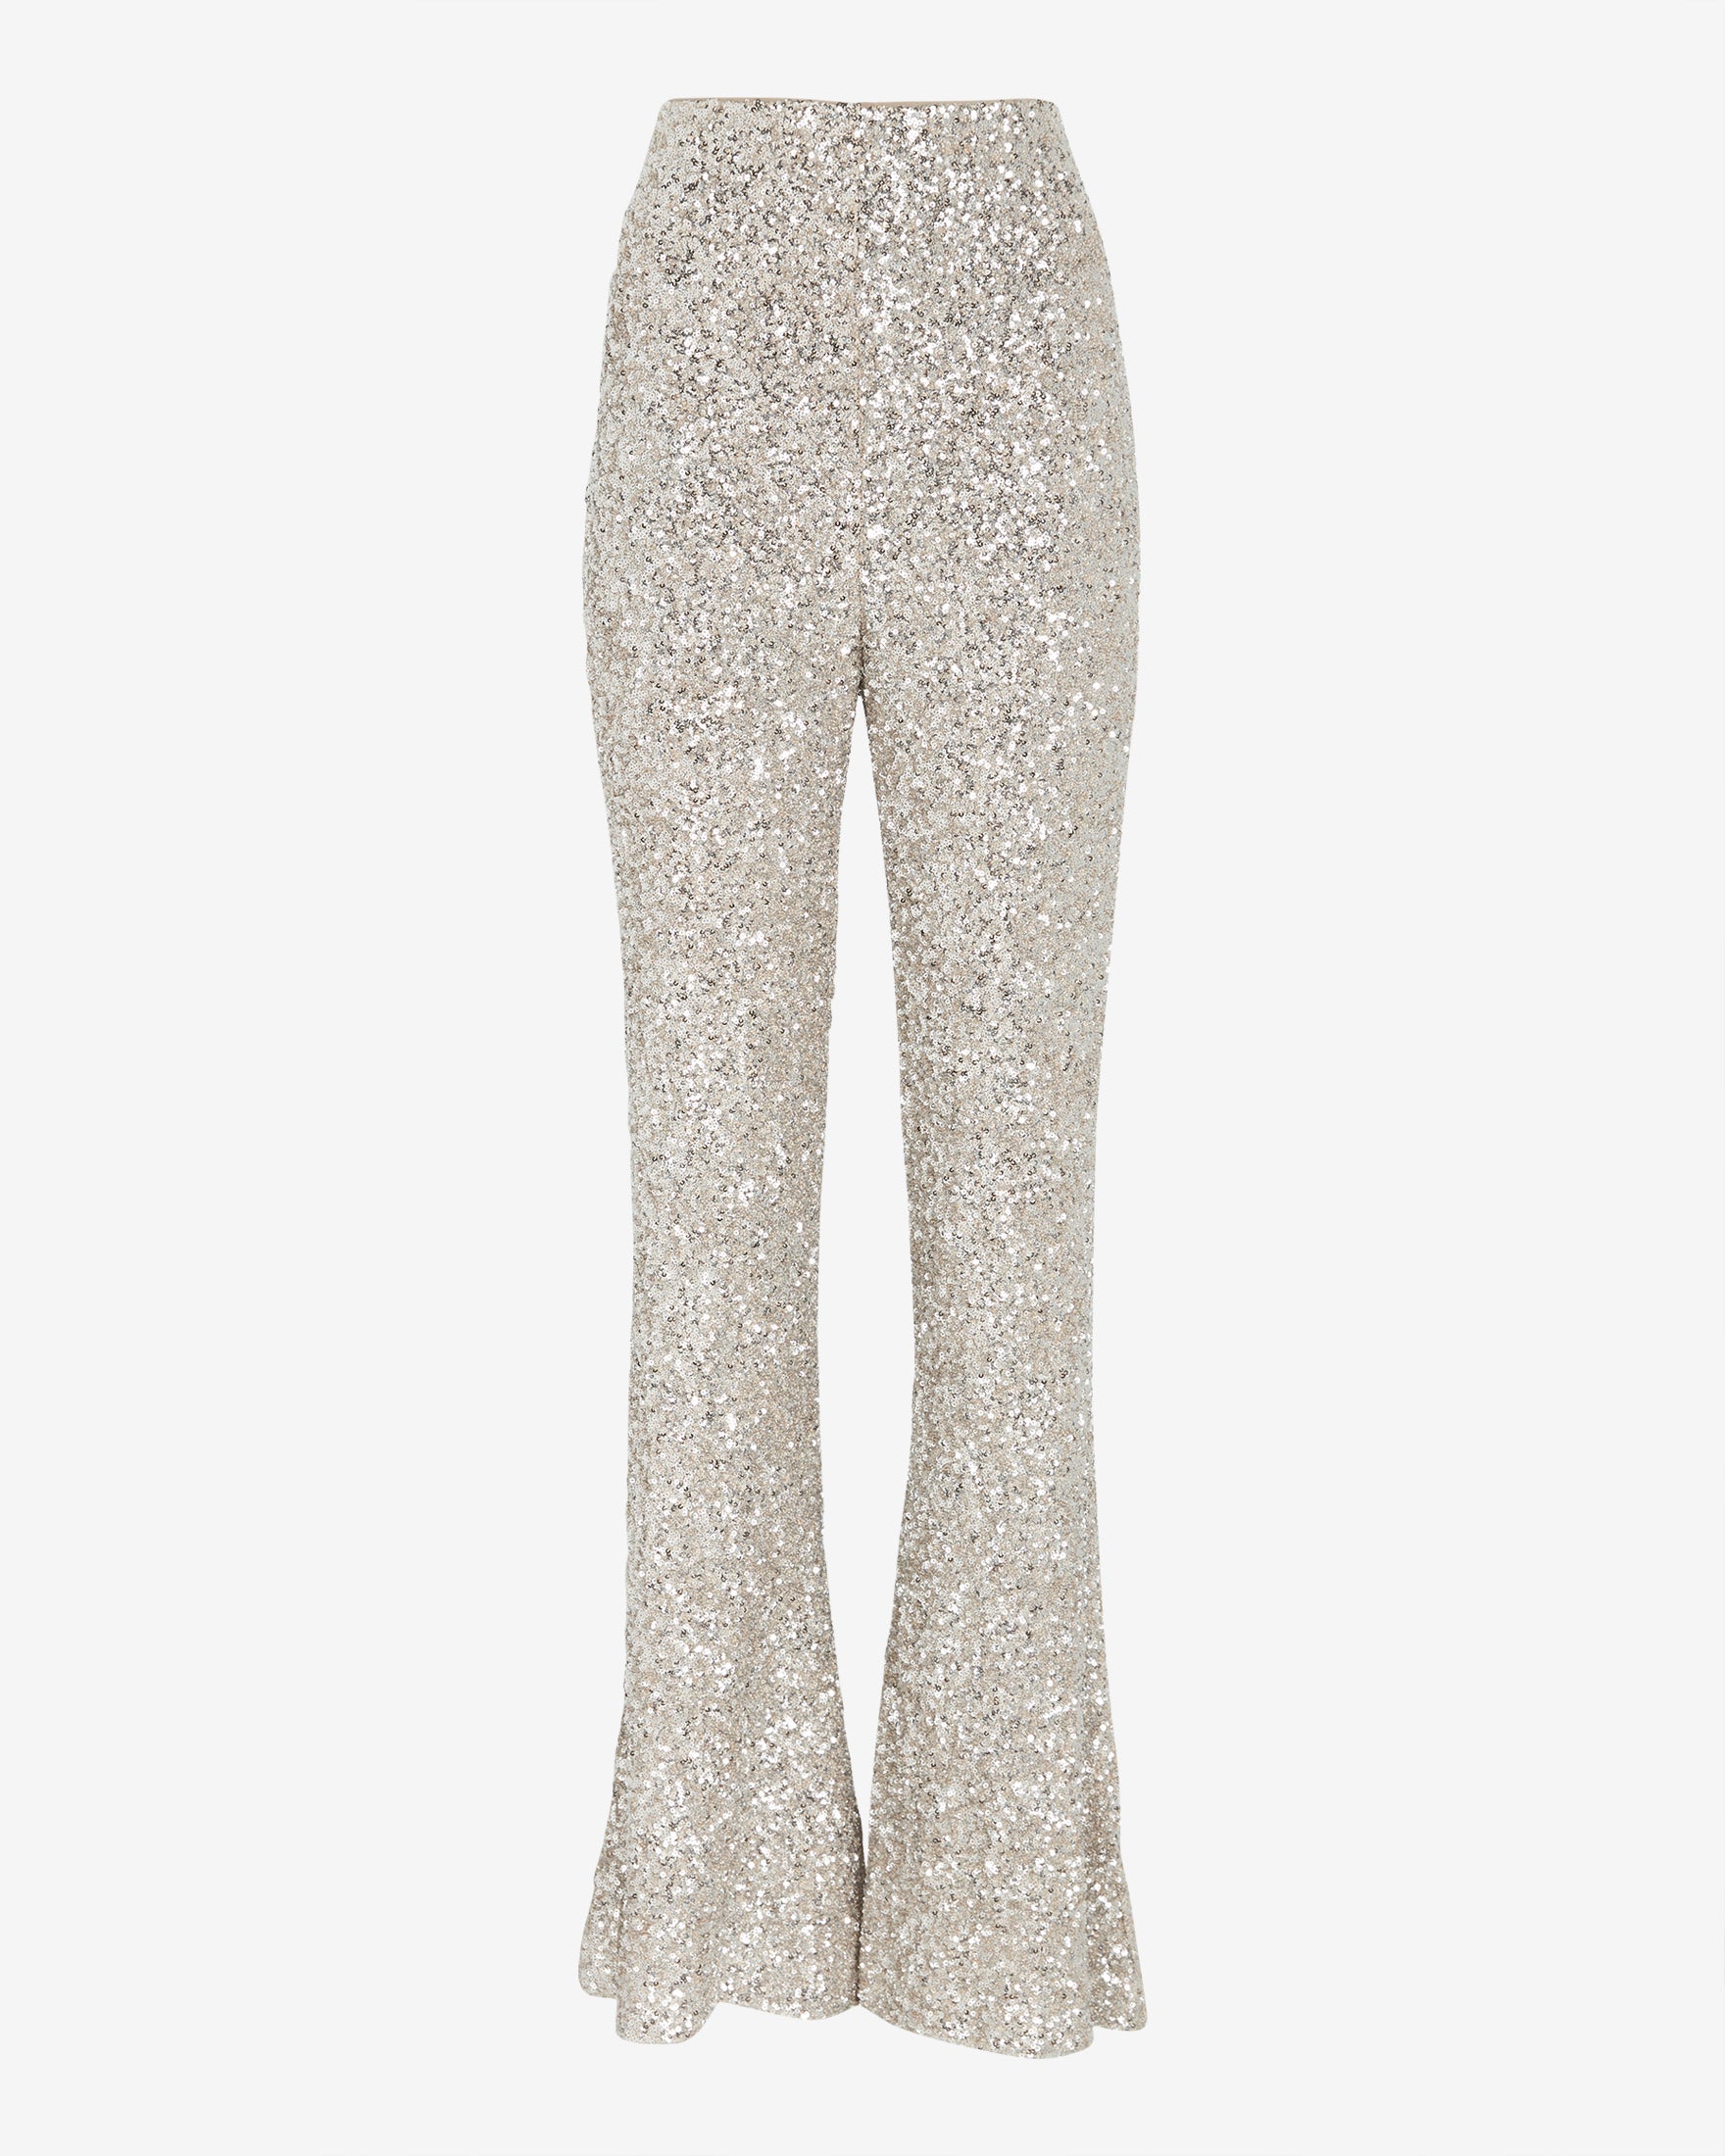 Flare pants covered in silver sequins